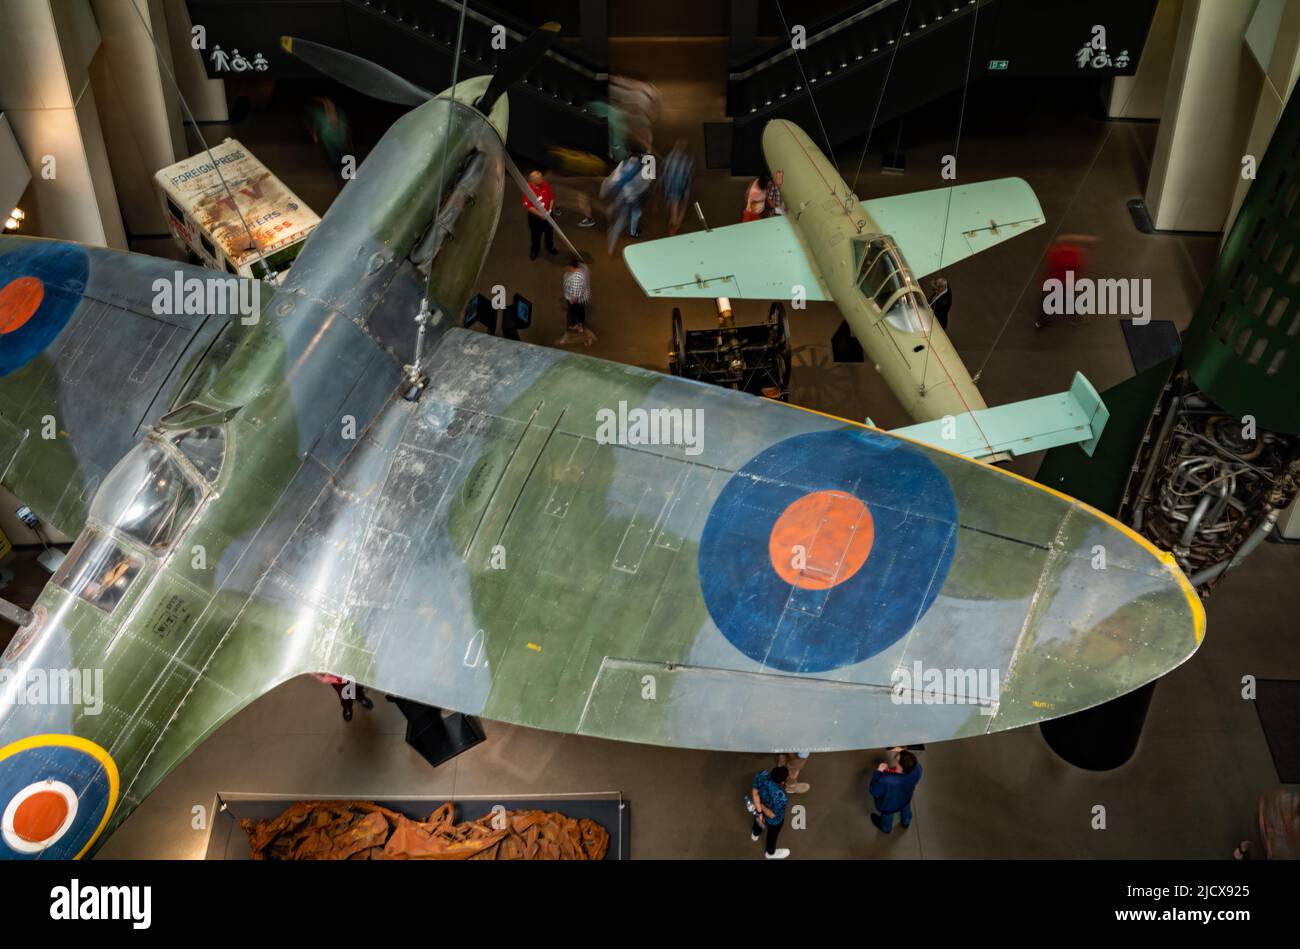 A Spitfire is displayed above a Japanese Yokosuka kamikaze jet plane at the Imperial War Museum (IWM) in London. Stock Photo